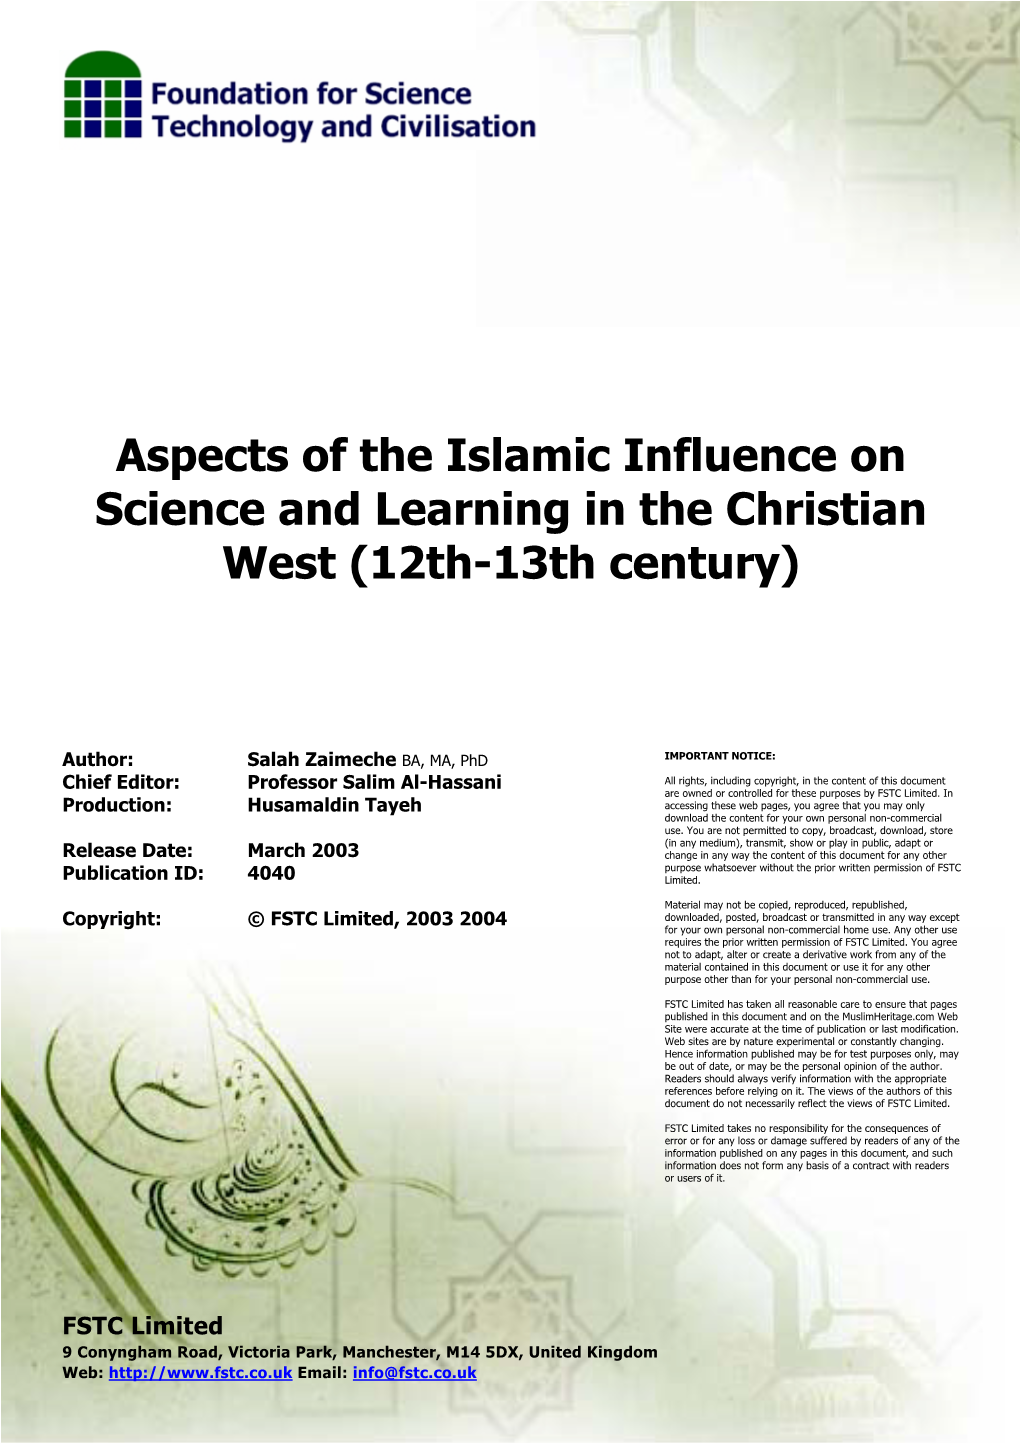 Aspects of the Islamic Influence on Science and Learning in the Christian West (12Th-13Th Century)